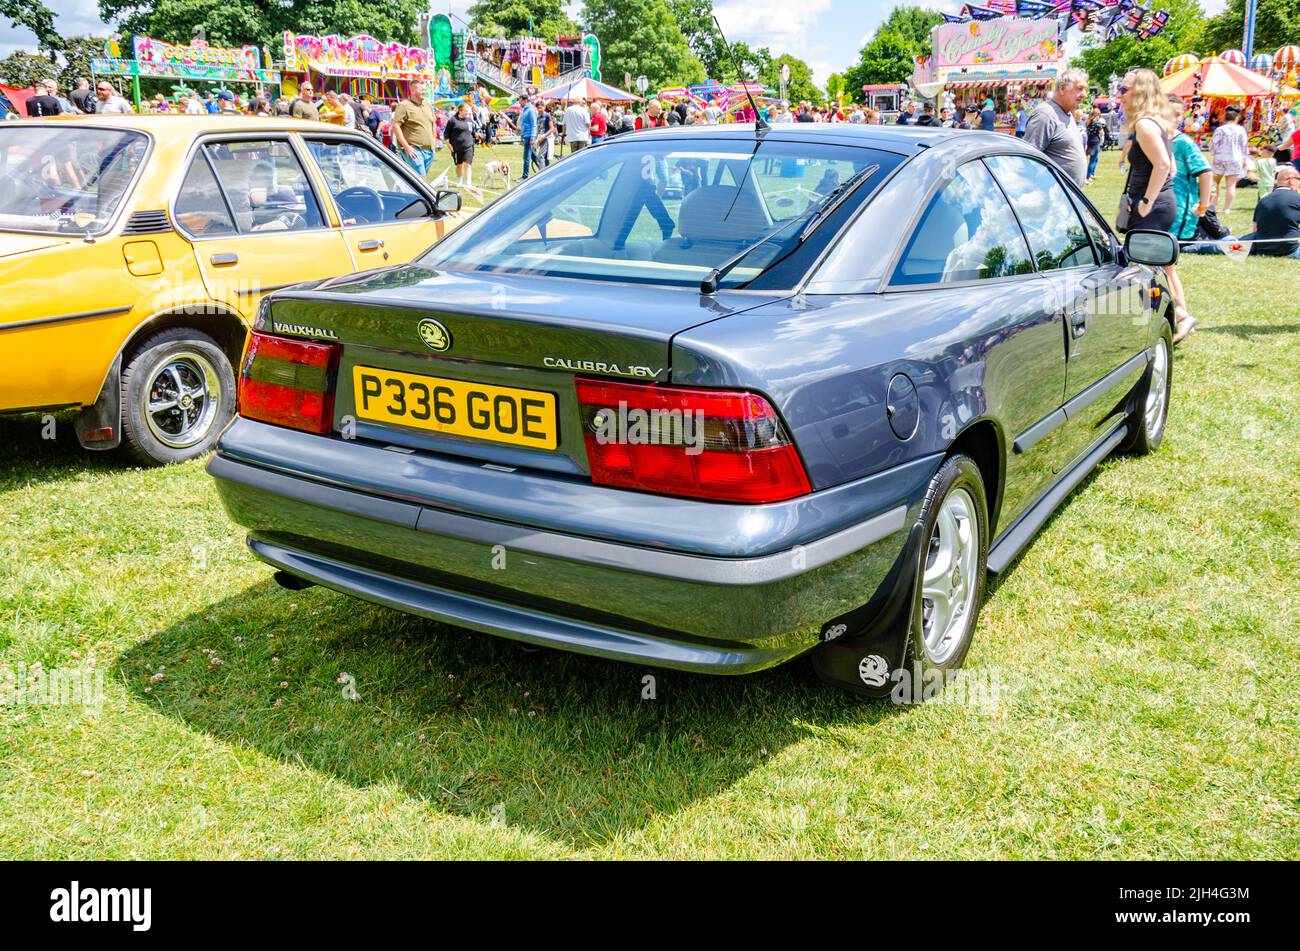 Rear view of a Vauxhall Calibra at The Berkshire Motor Show in Reading, UK Stock Photo